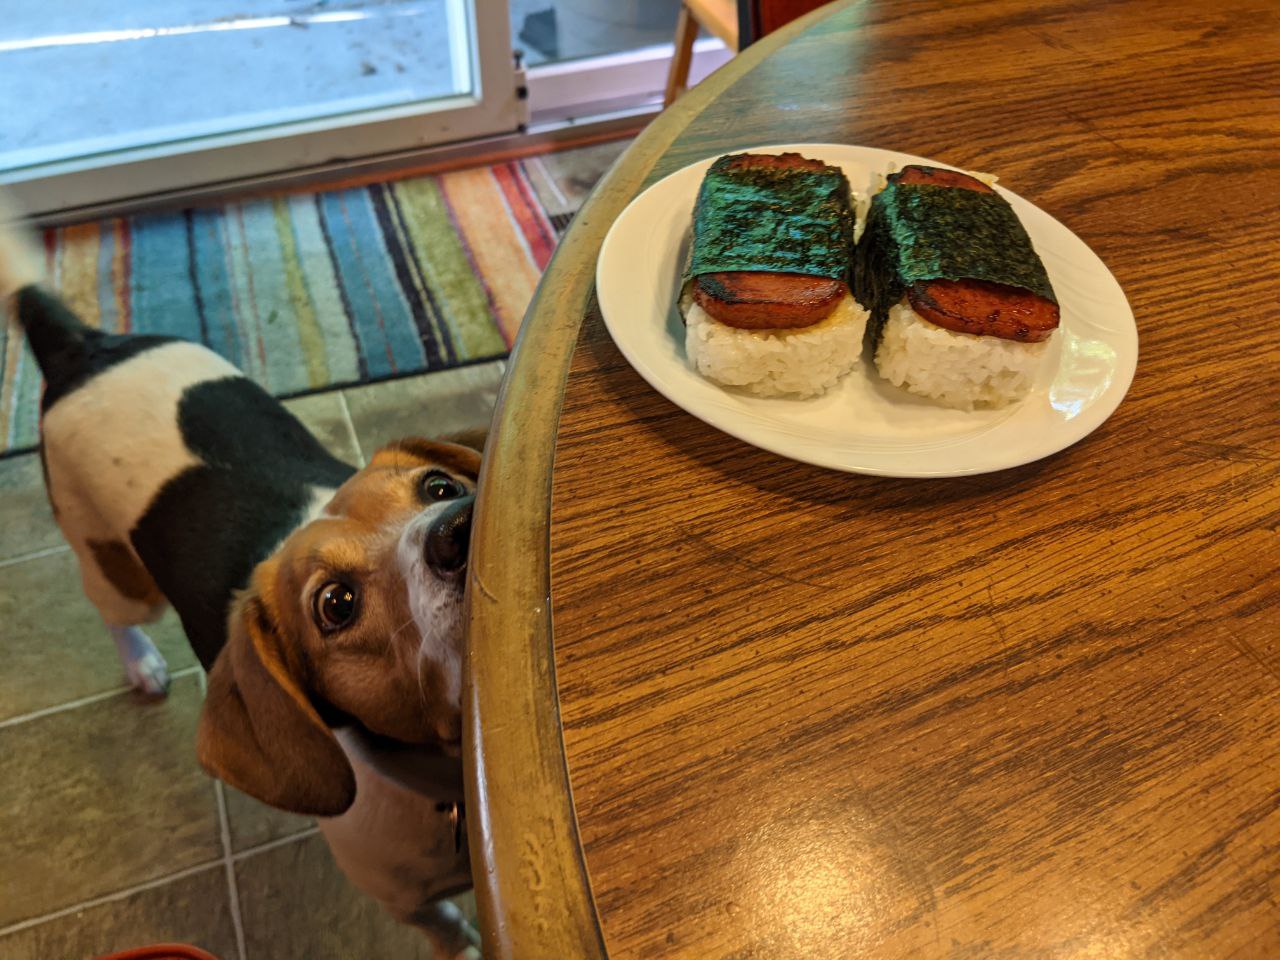 Togo smelling a plate of spam musubi.